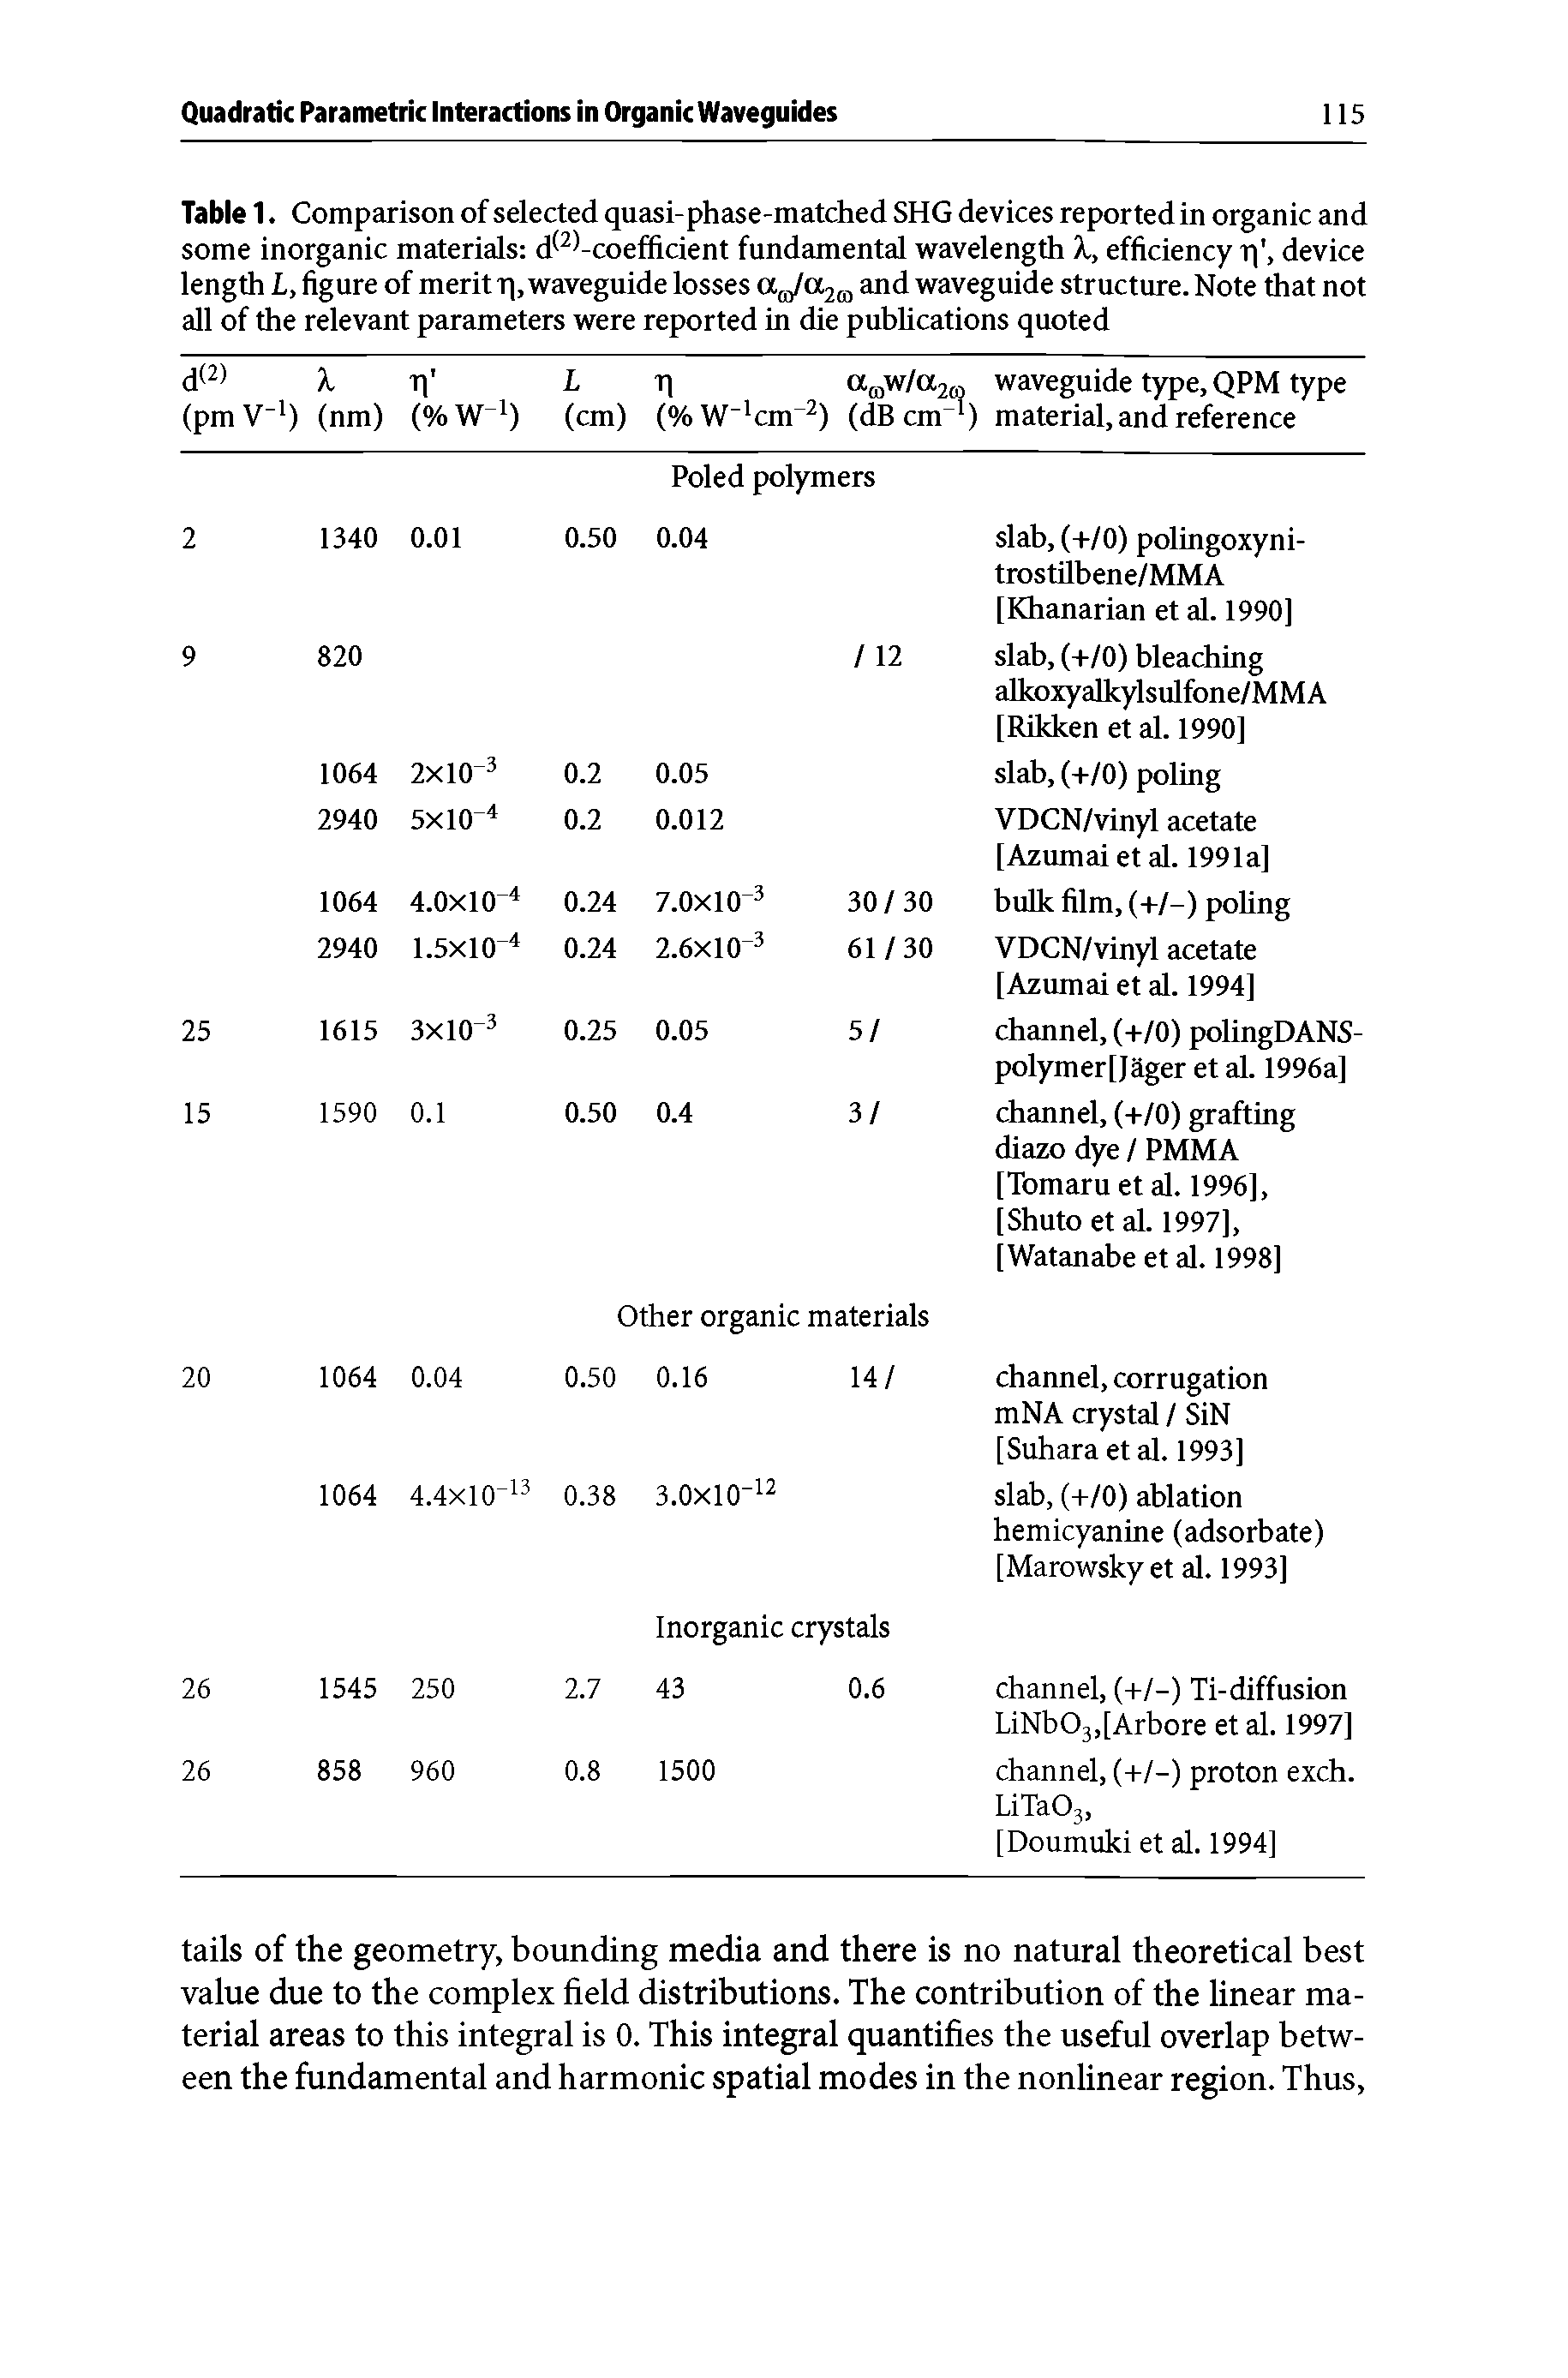 Table 1. Comparison of selected quasi-phase-matched SHG devices reported in organic and some inorganic materials d -coefficient fundamental wavelength Xy efficiency t, device length Ly figure of merit T, waveguide losses aja2m and waveguide structure. Note that not all of the relevant parameters were reported in die publications quoted...